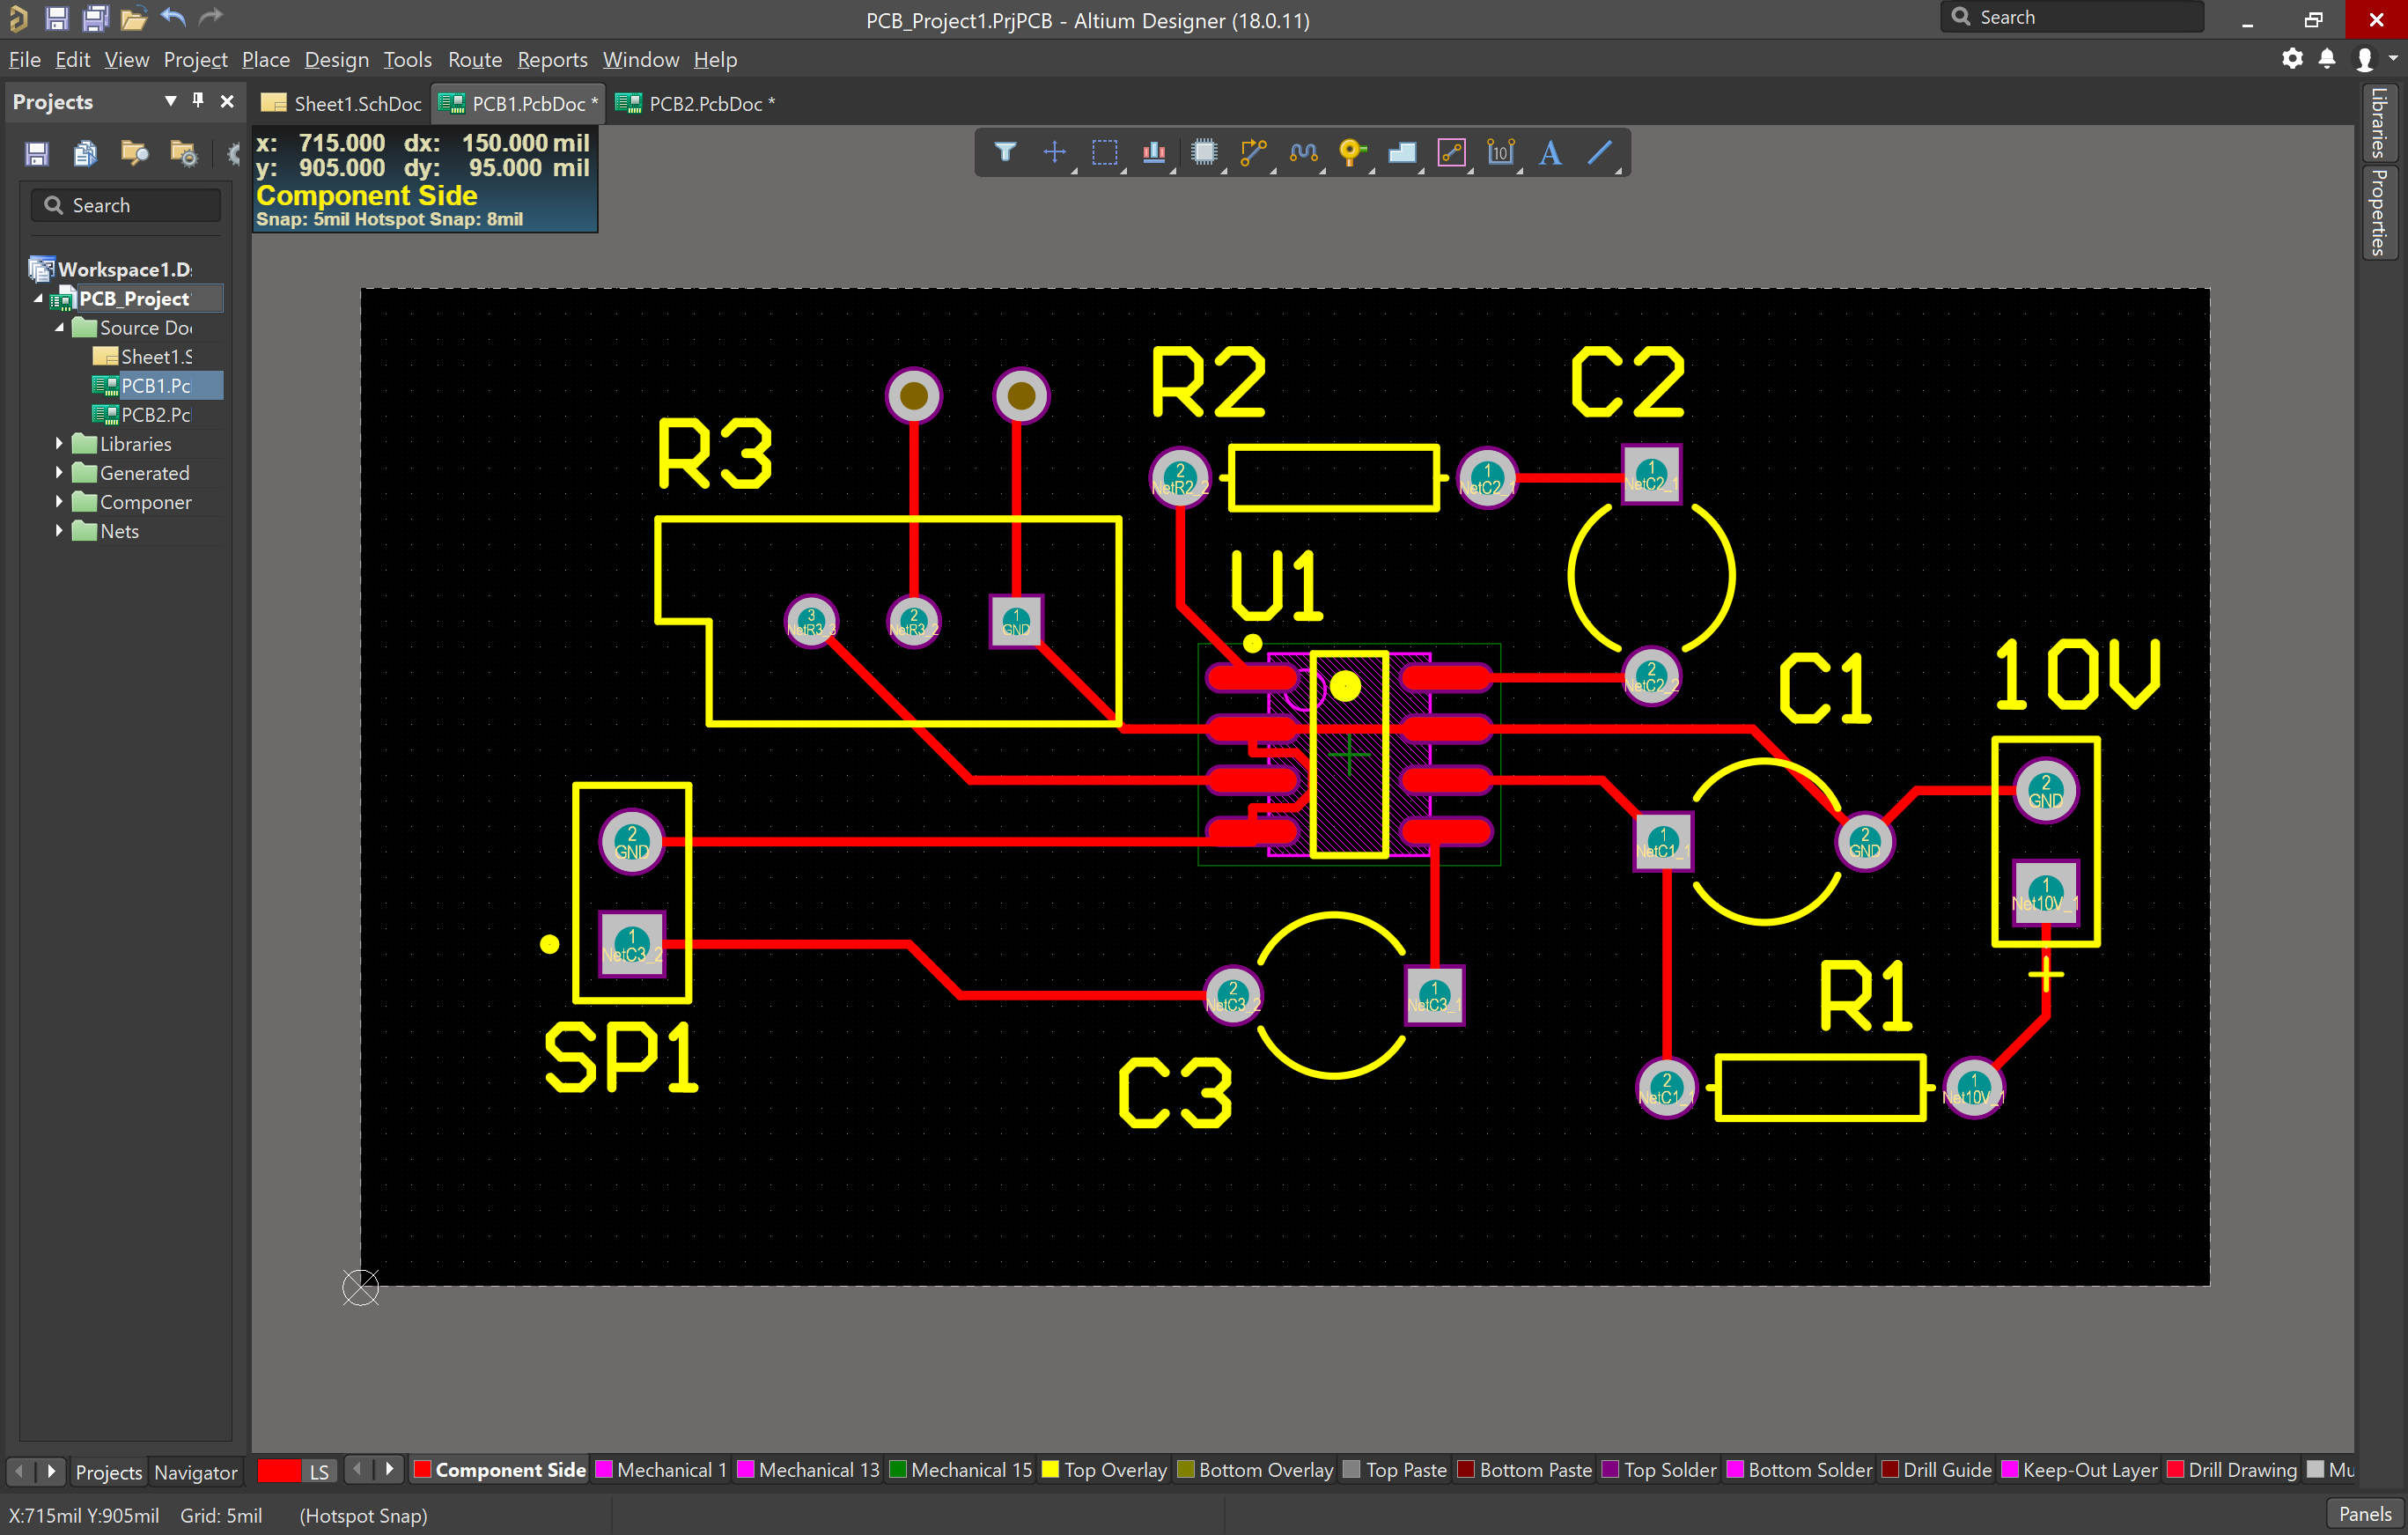 Fully routed and with vias added PCB in Altium Designer